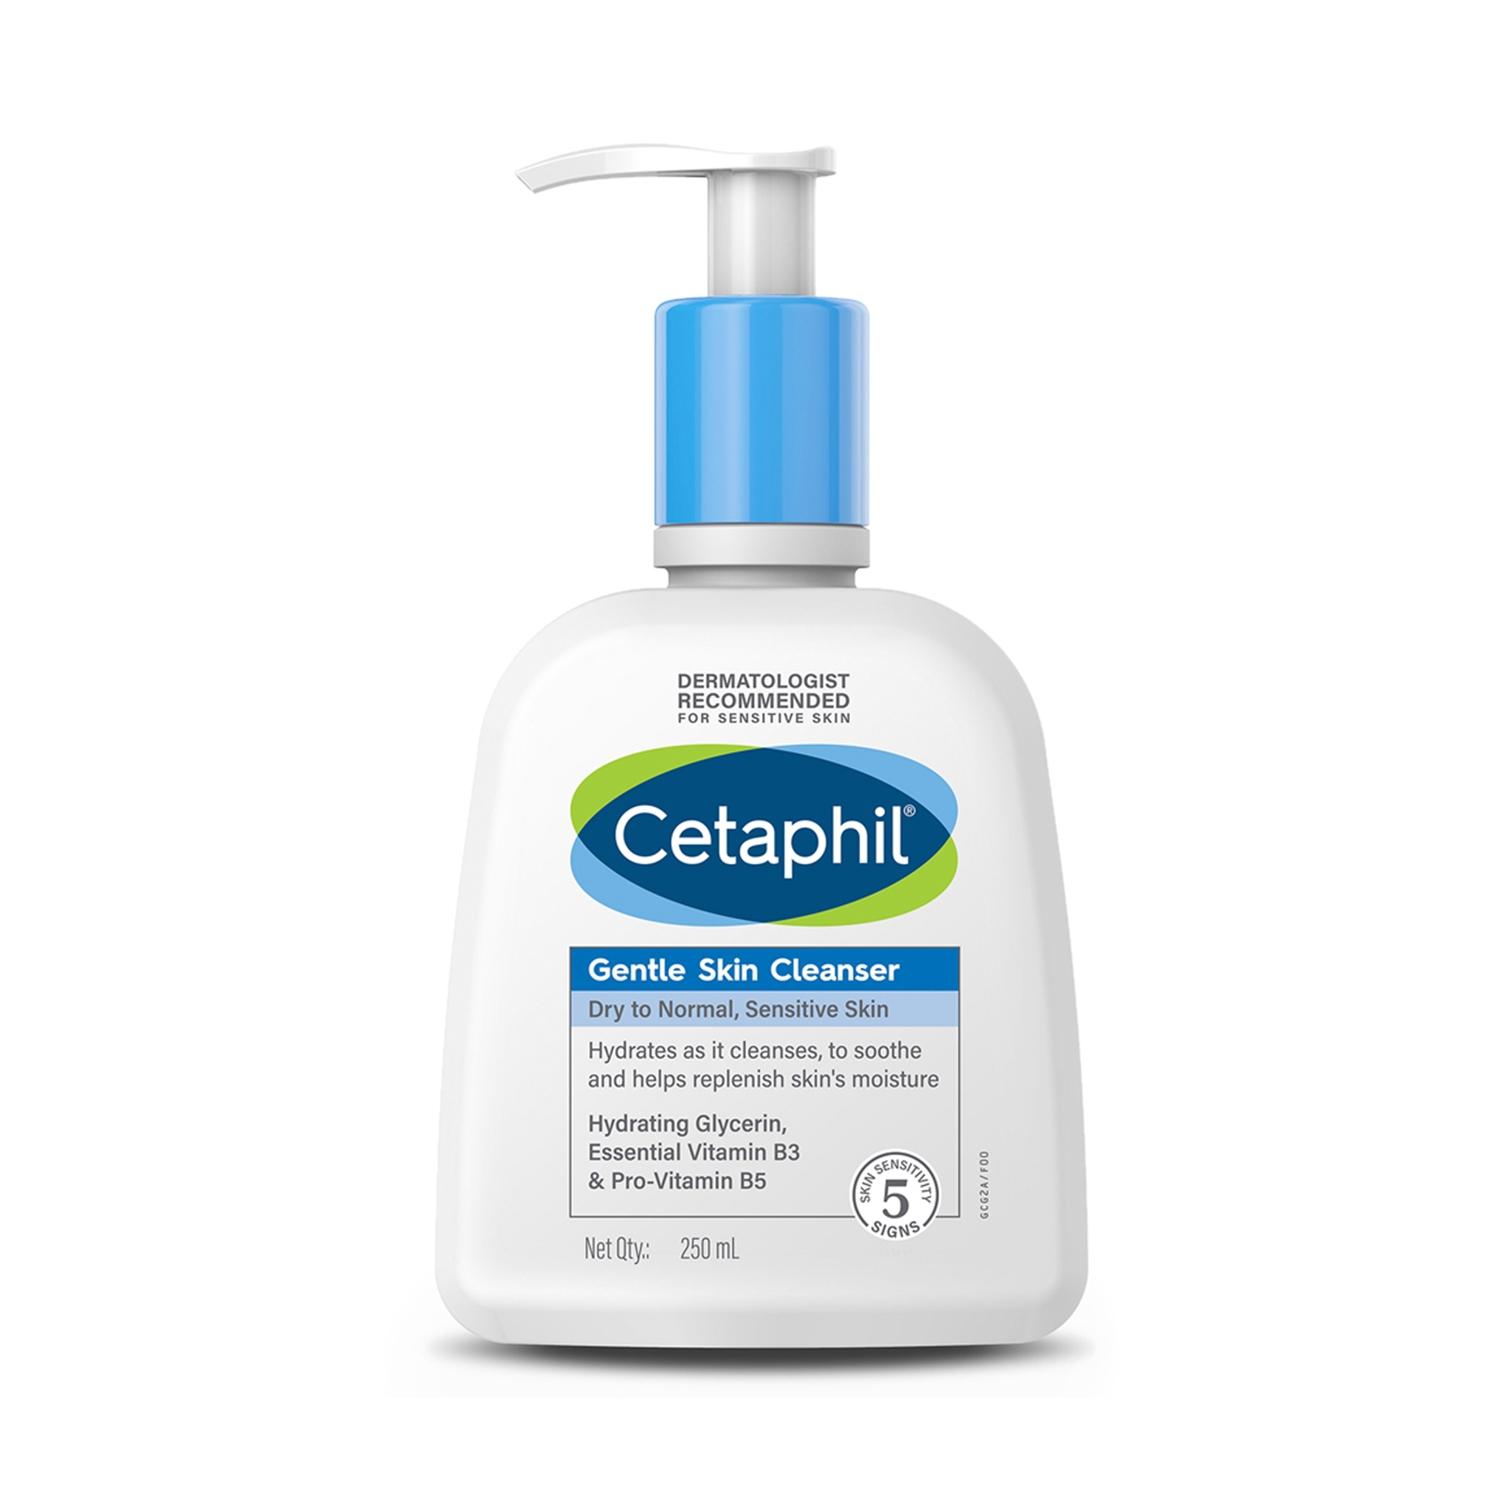 cetaphil gentle skin cleanser for dry to normal, sensitive skin (250ml)